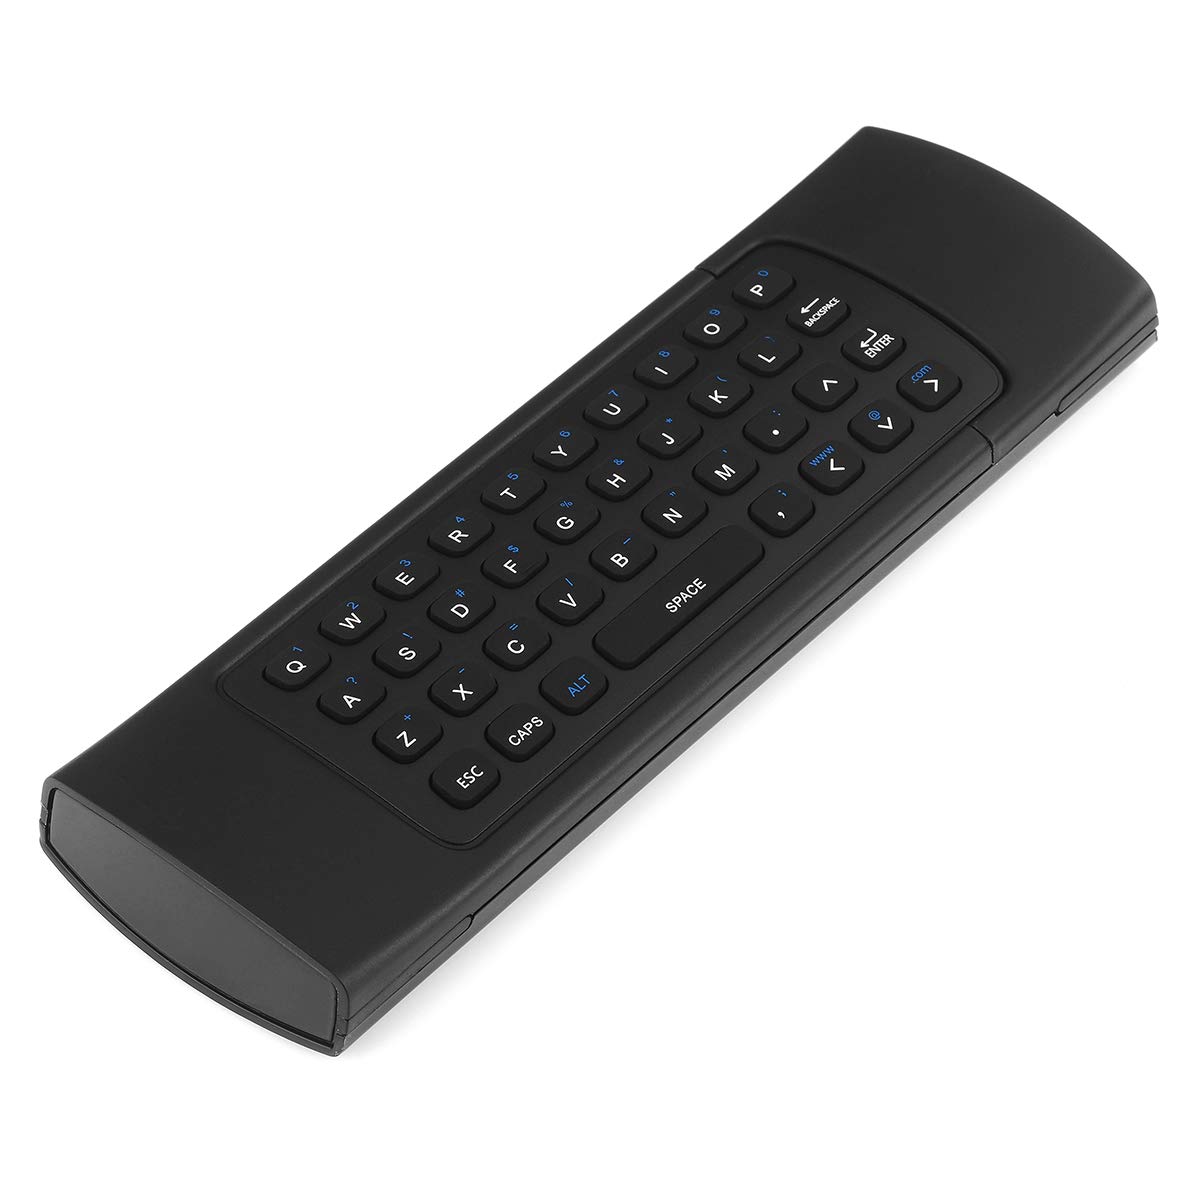 Fly Mouse for Android tv Box, MX3 Wireless Keyboard 2.4G Smart TV Remote with Motion Sensing Game Handle Android Remote Control for Android TV Box PC TV Projector HTPC All-in-one PC